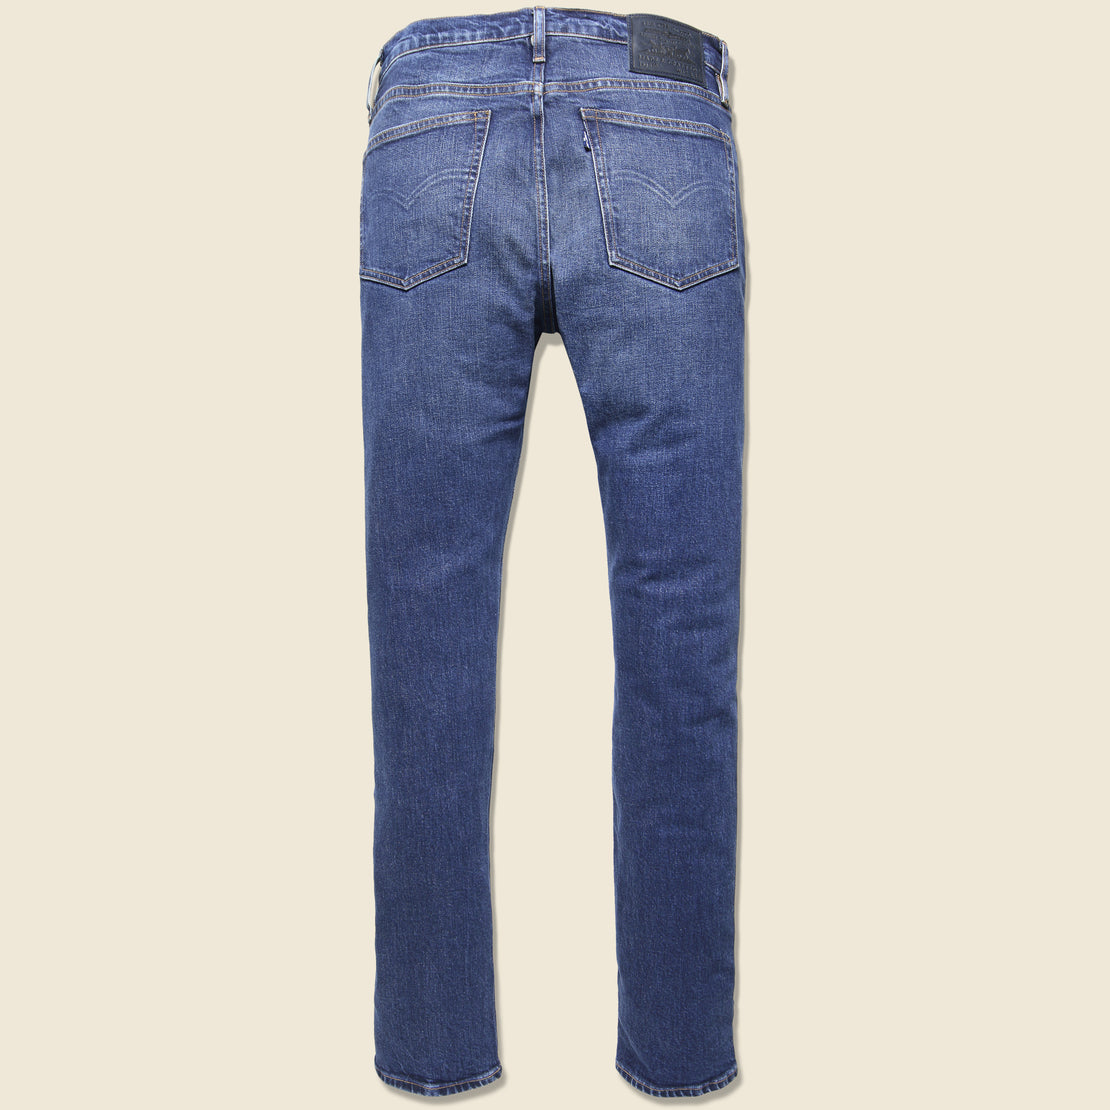 510 Jean - Aylin - Levis Made & Crafted - STAG Provisions - Pants - Denim